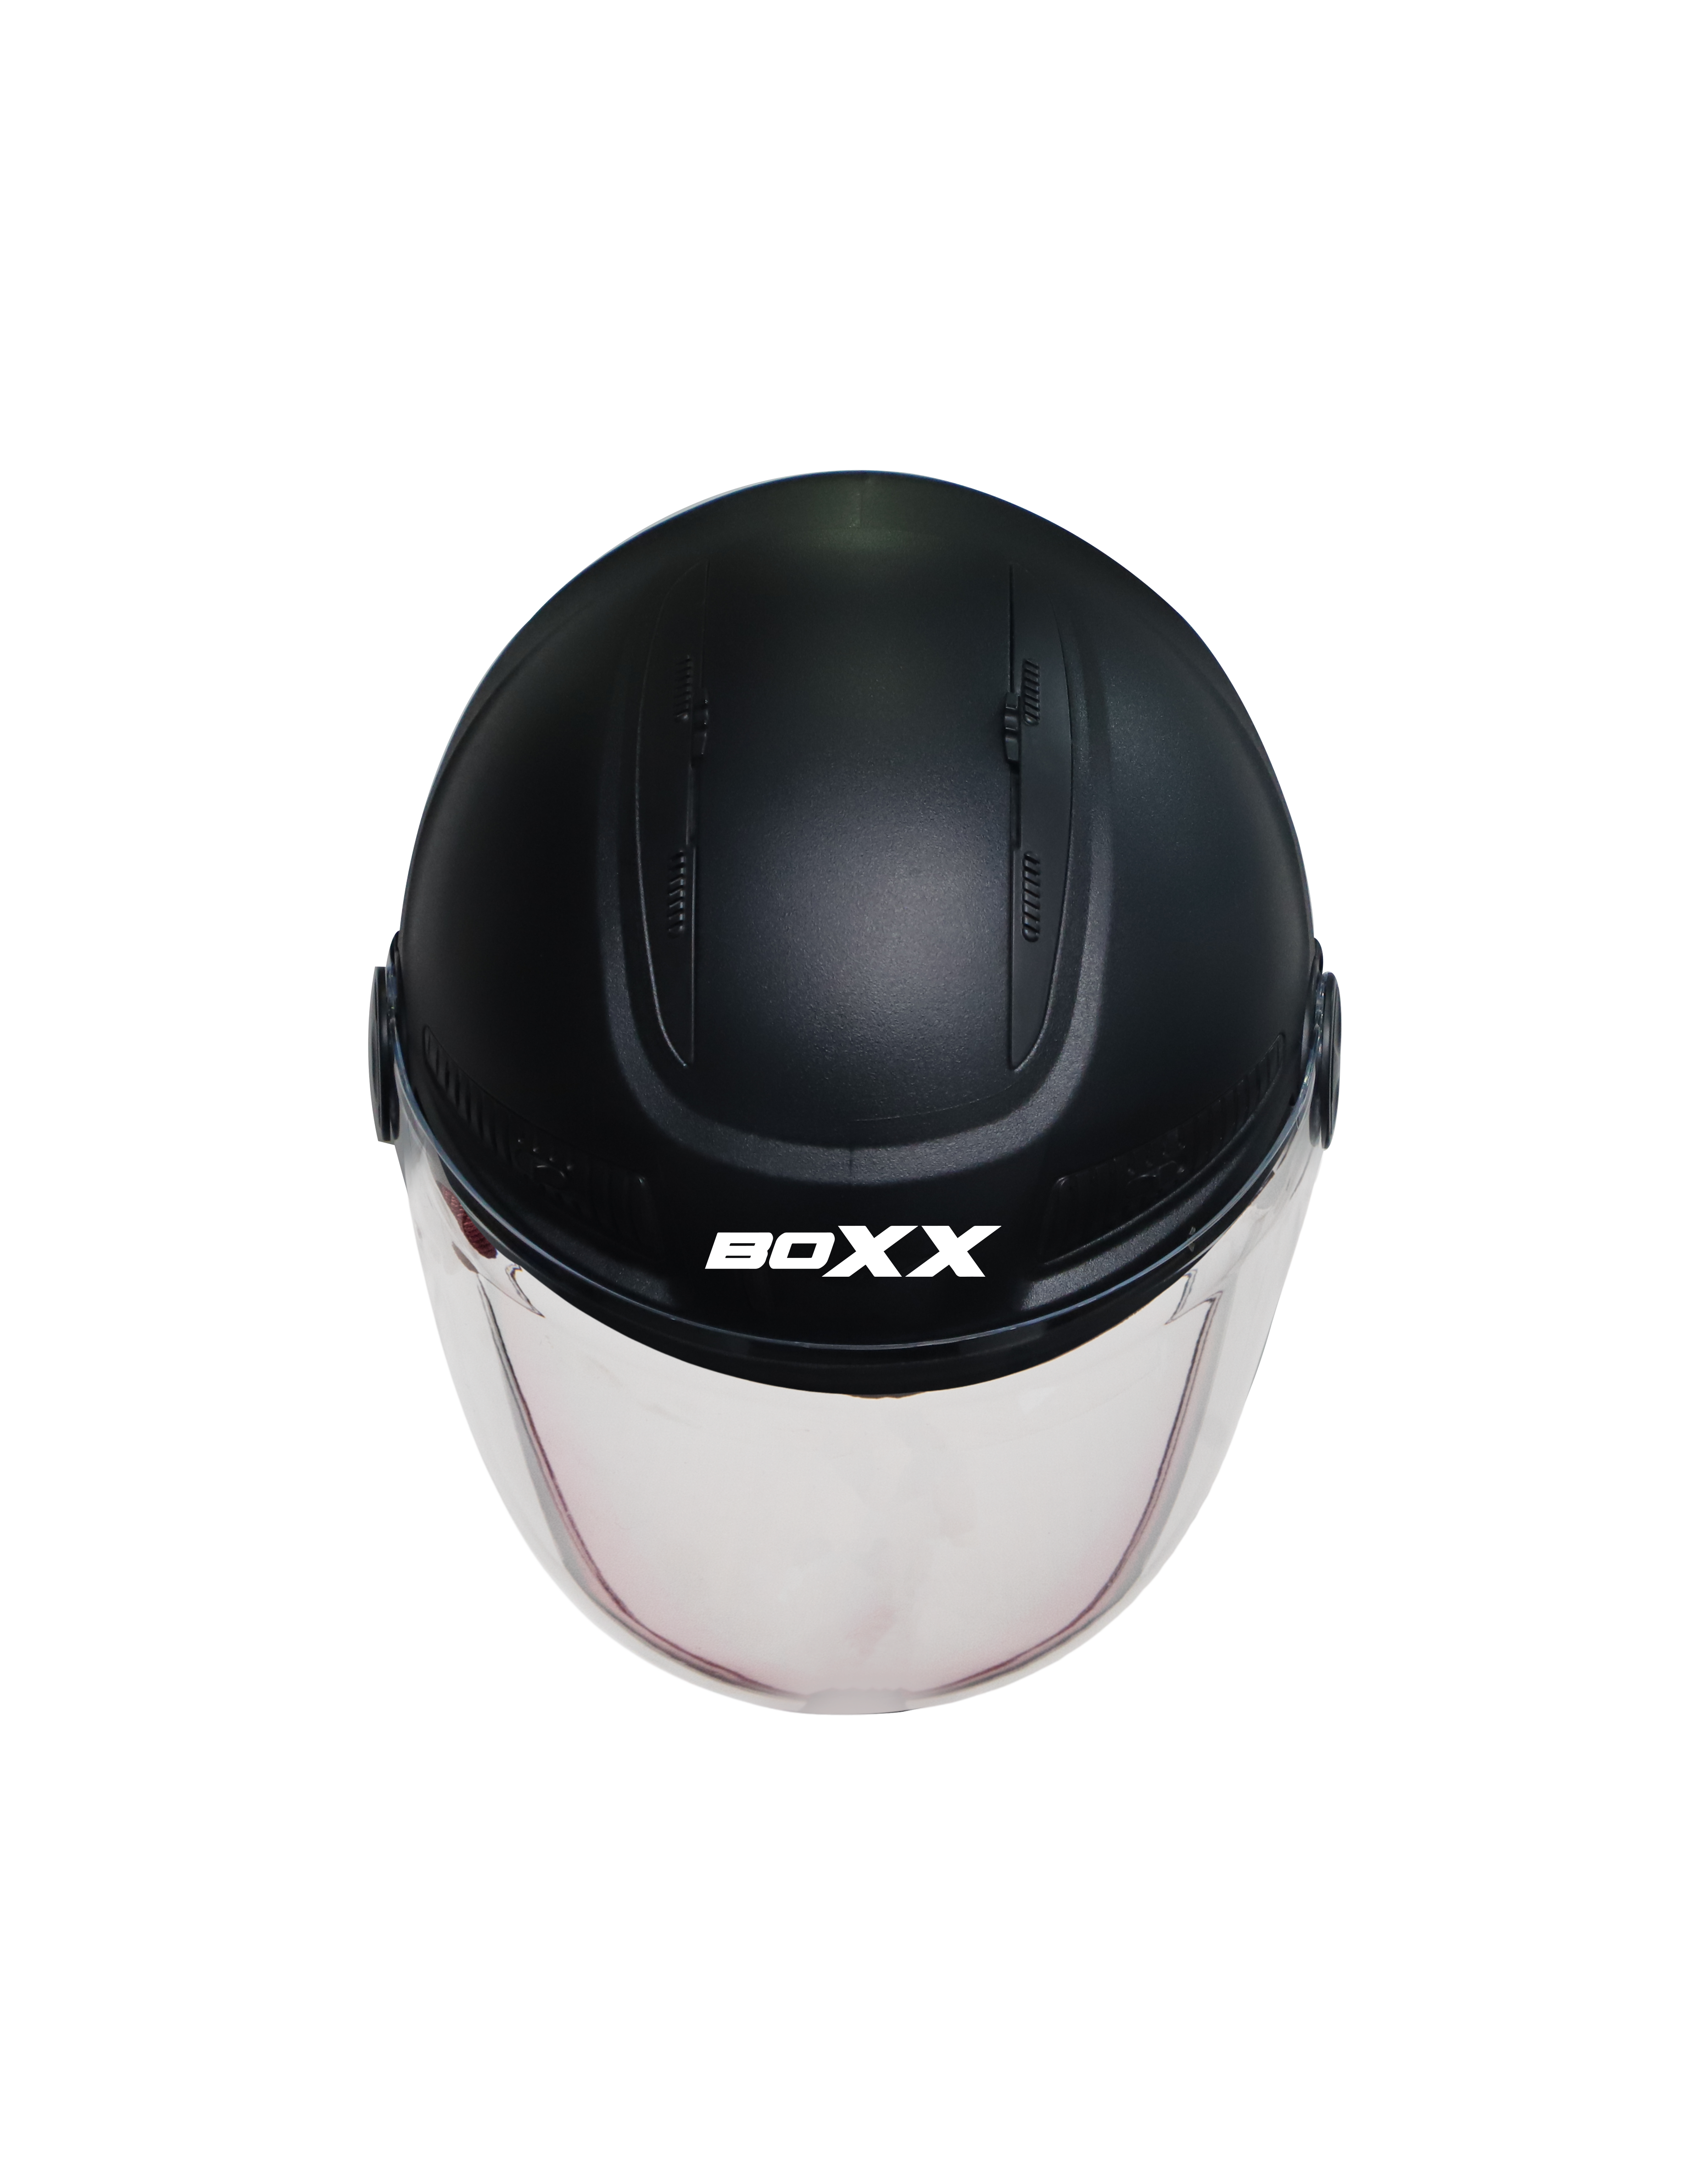 Steelbird SBH-24 Boxx Dashing ISI Certified Open Face Helmet For Men And Women (Dashing Black With Clear Visor)